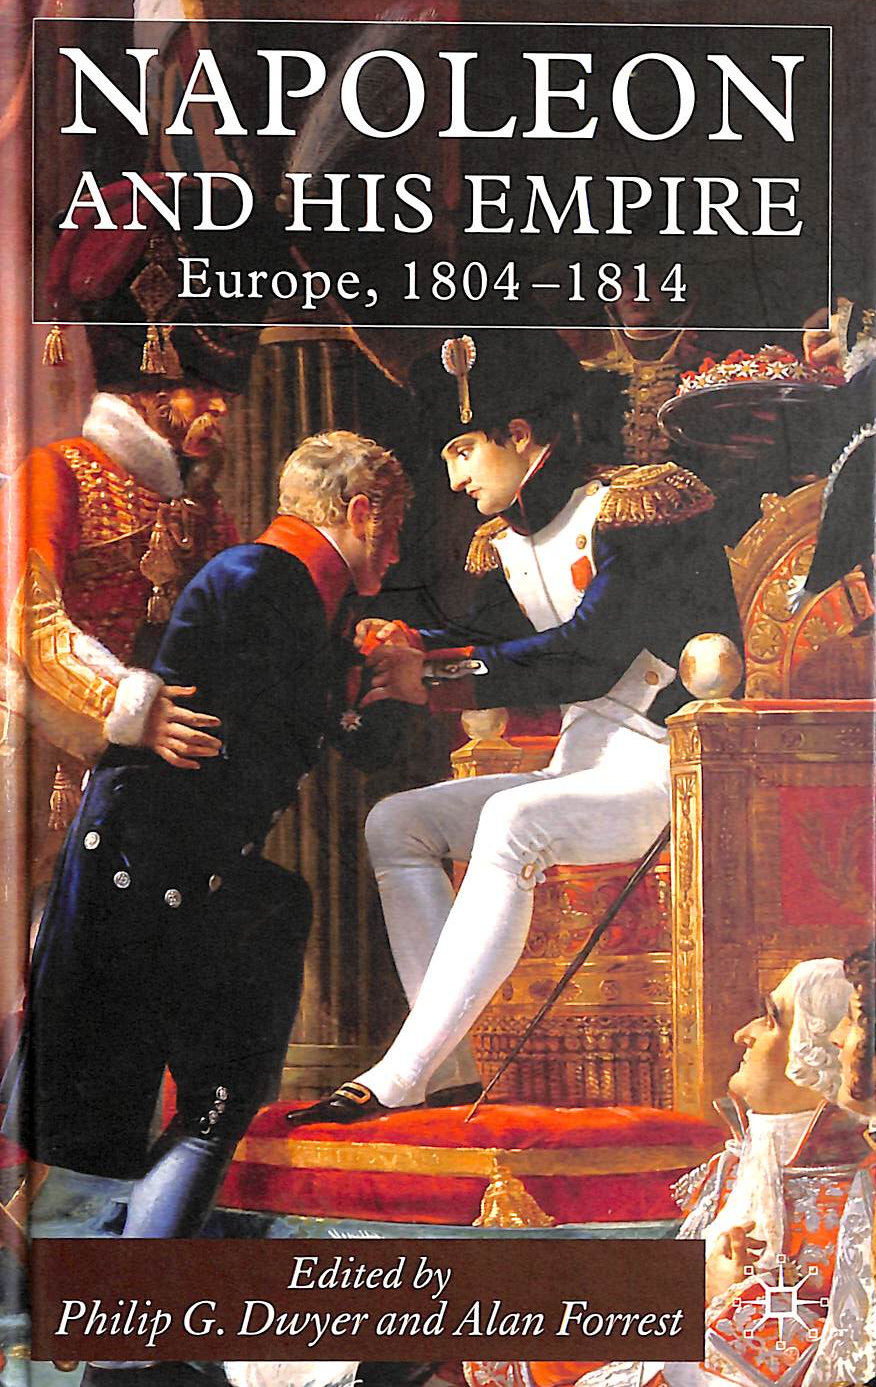 DWYER, PHILIP G. [EDITOR]; FORREST, ALAN [EDITOR]; - Napoleon and His Empire: Europe, 1804-1814